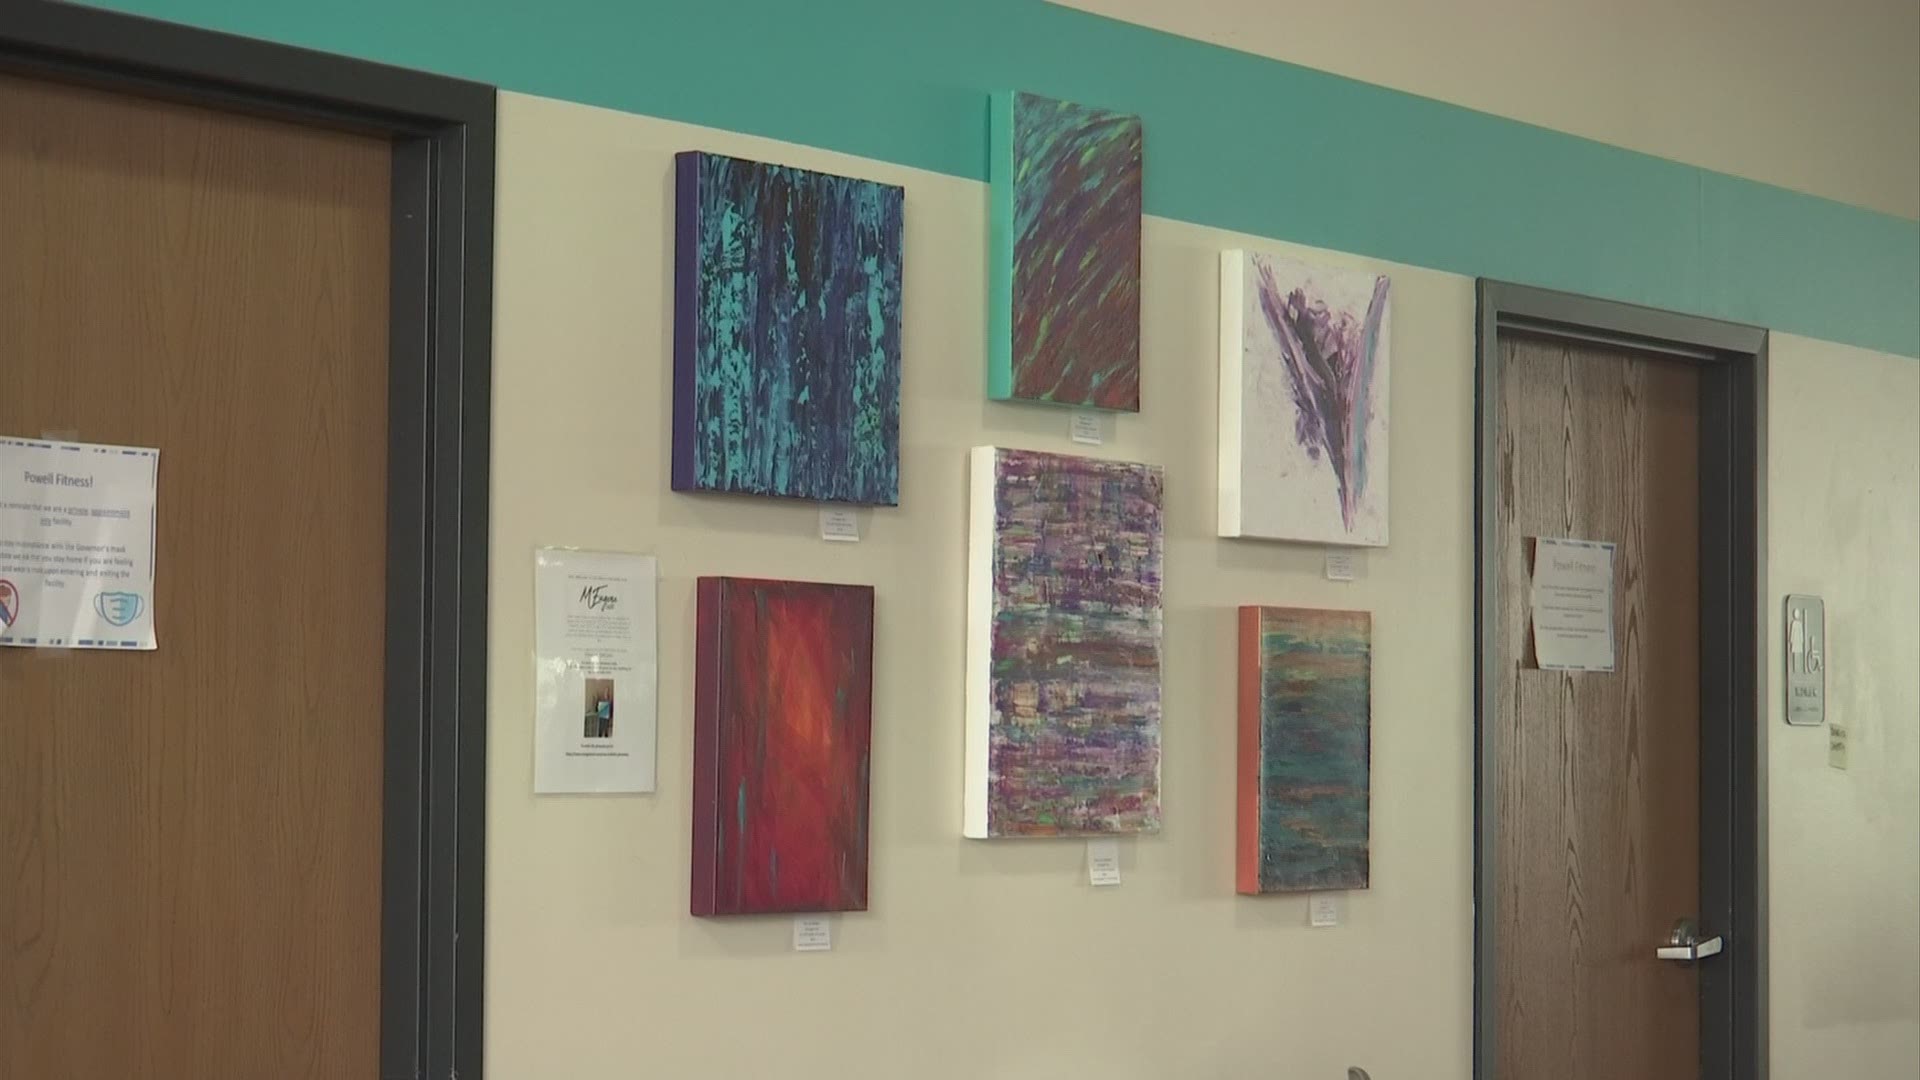 Through an announcement made on social media, Kim Davis is inviting artists to hang up their work on the walls of Powell Fitness.